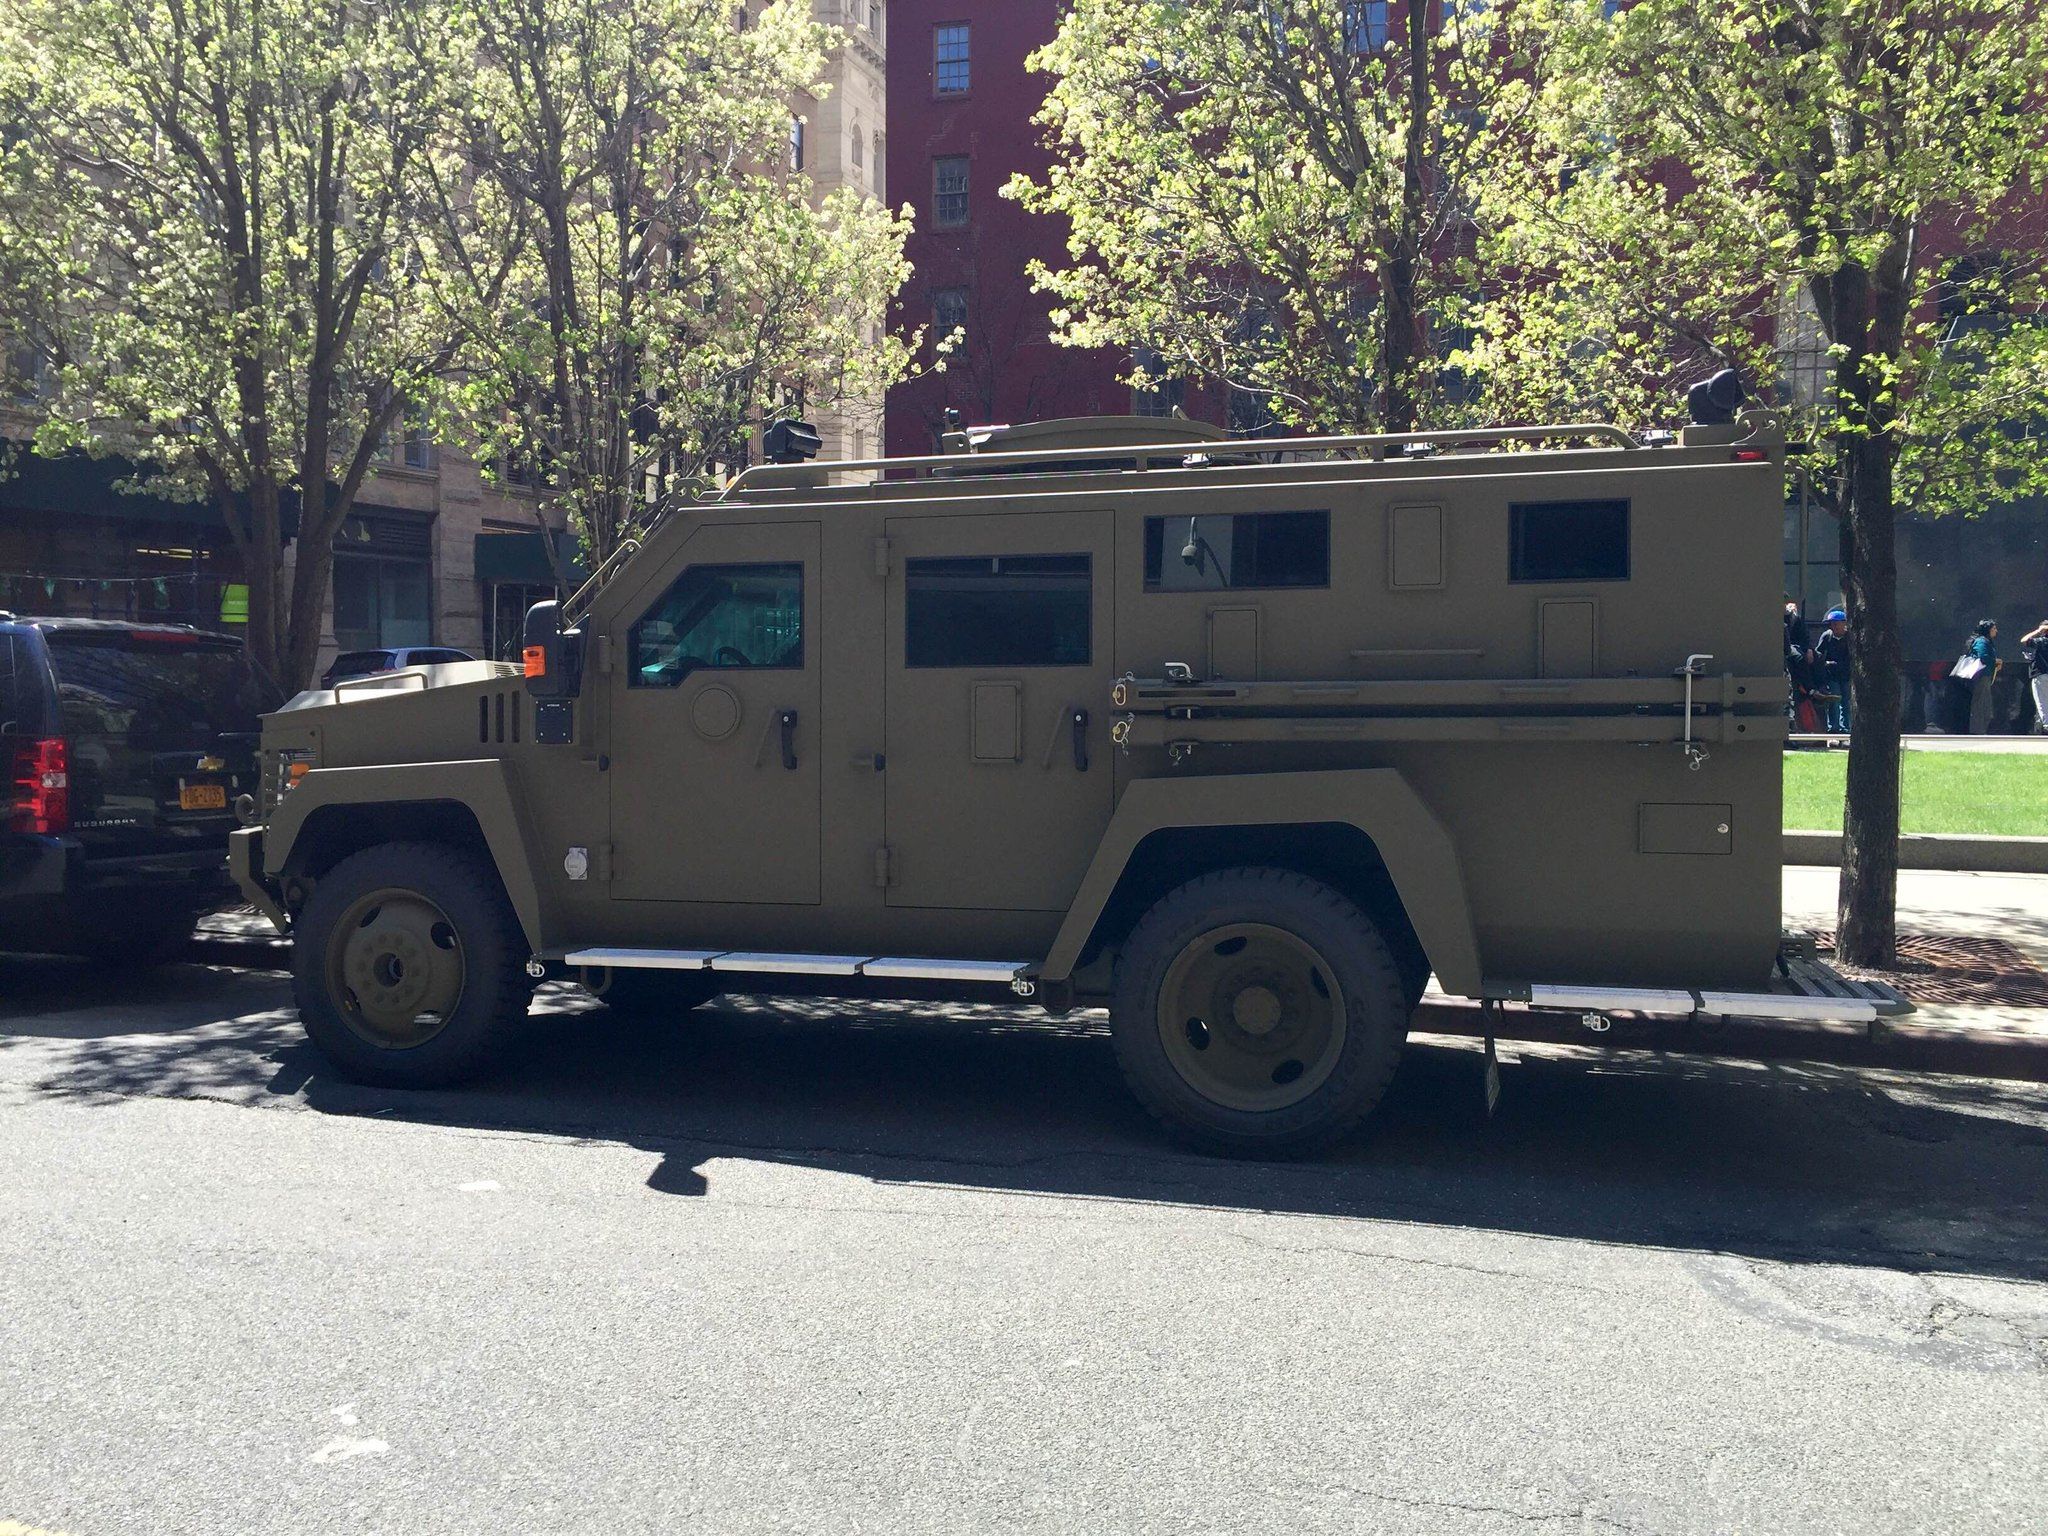 FBI New York don't just drive black sedans. SWAT's Bearcat ready to roll out to the next operation. #FBI